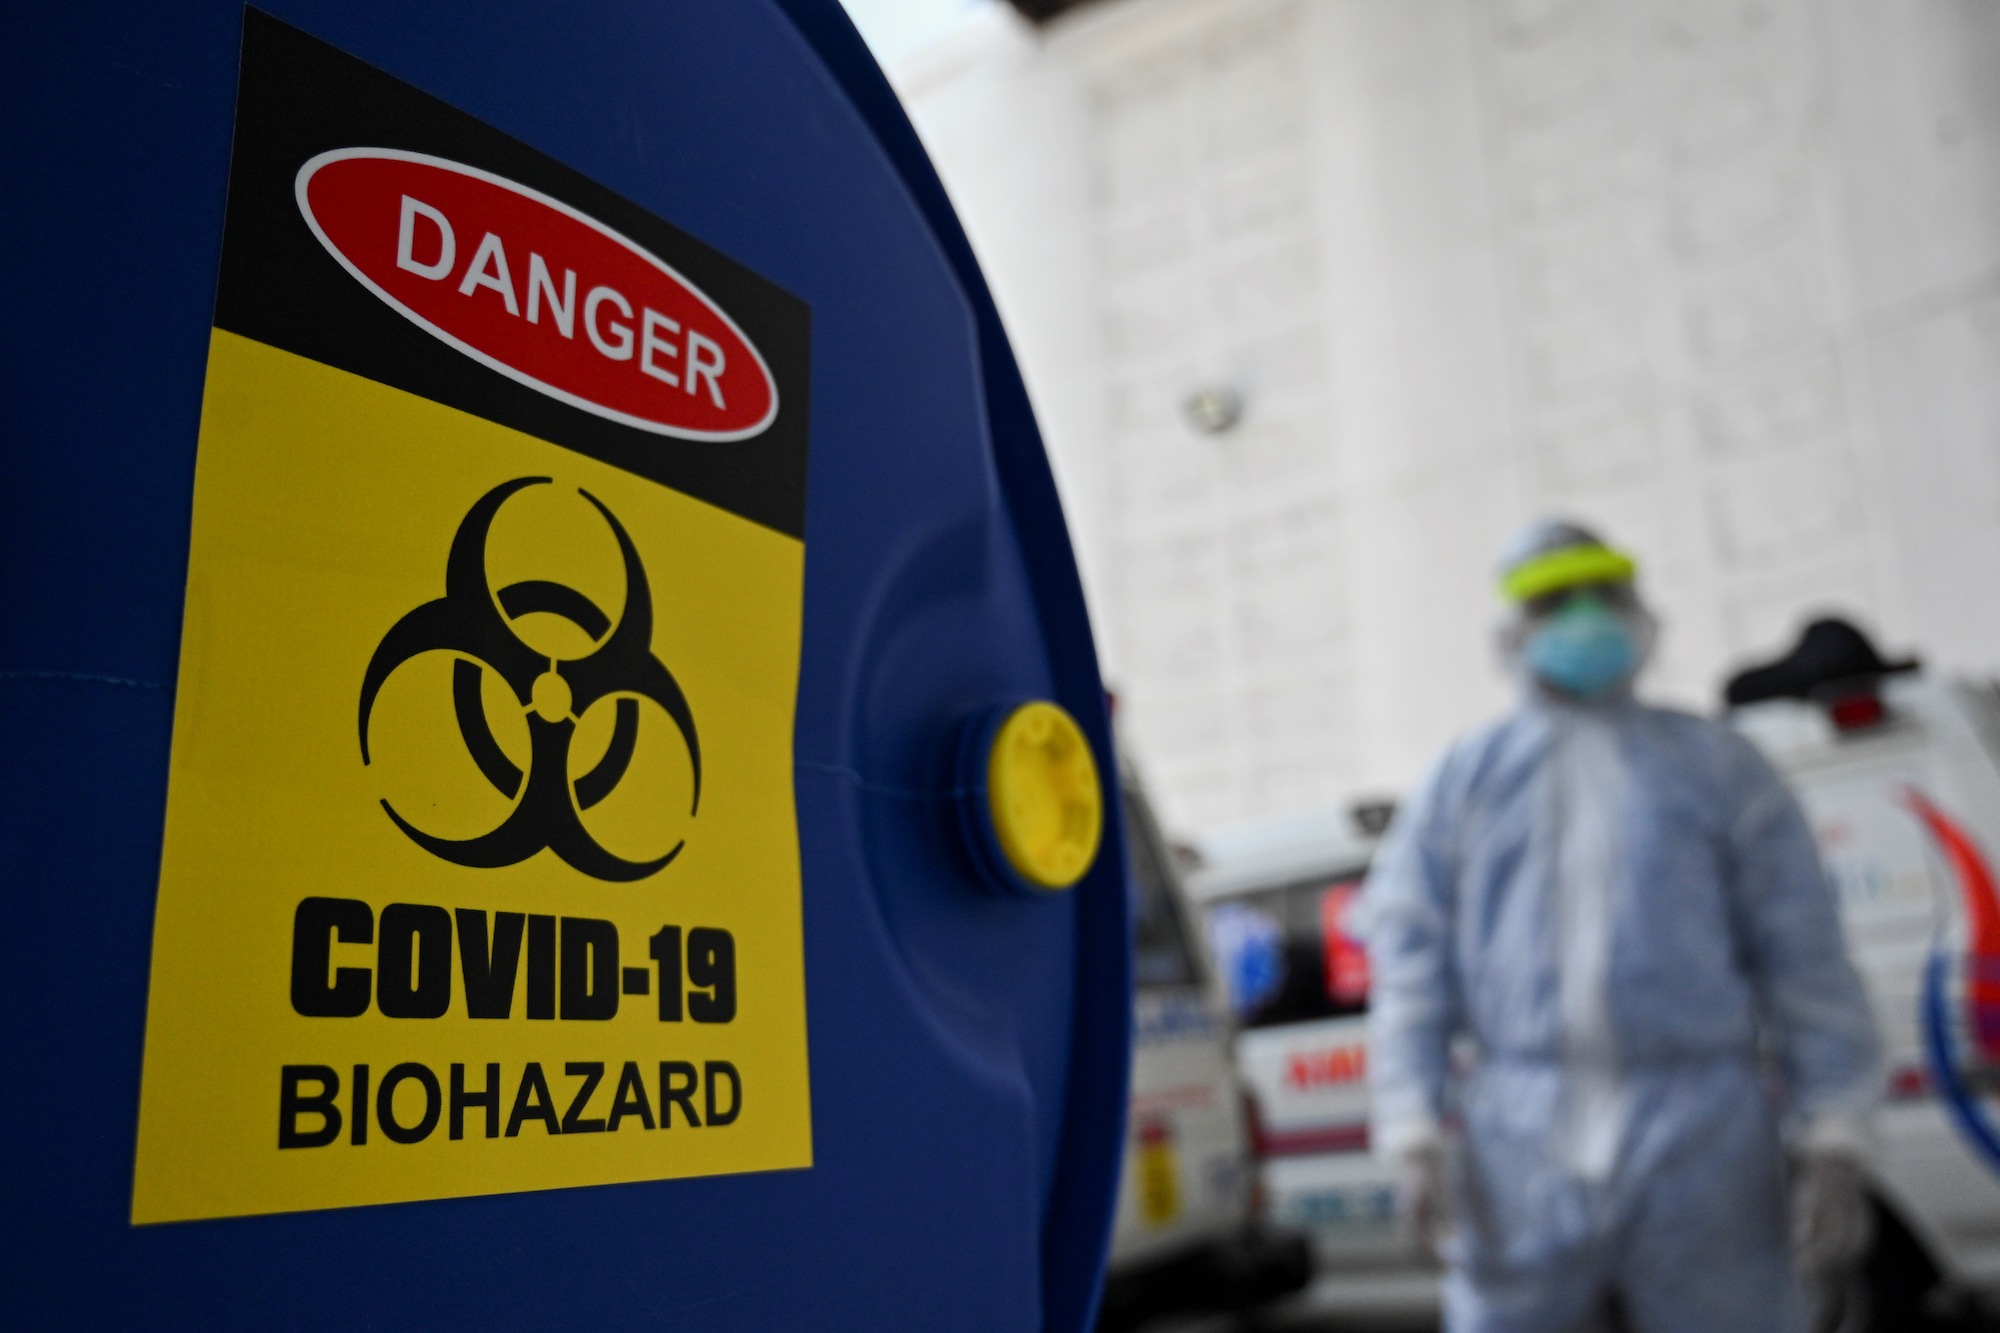 Design predicts Covid-19 pandemic will ‘abate’ by May, but experts are skeptical